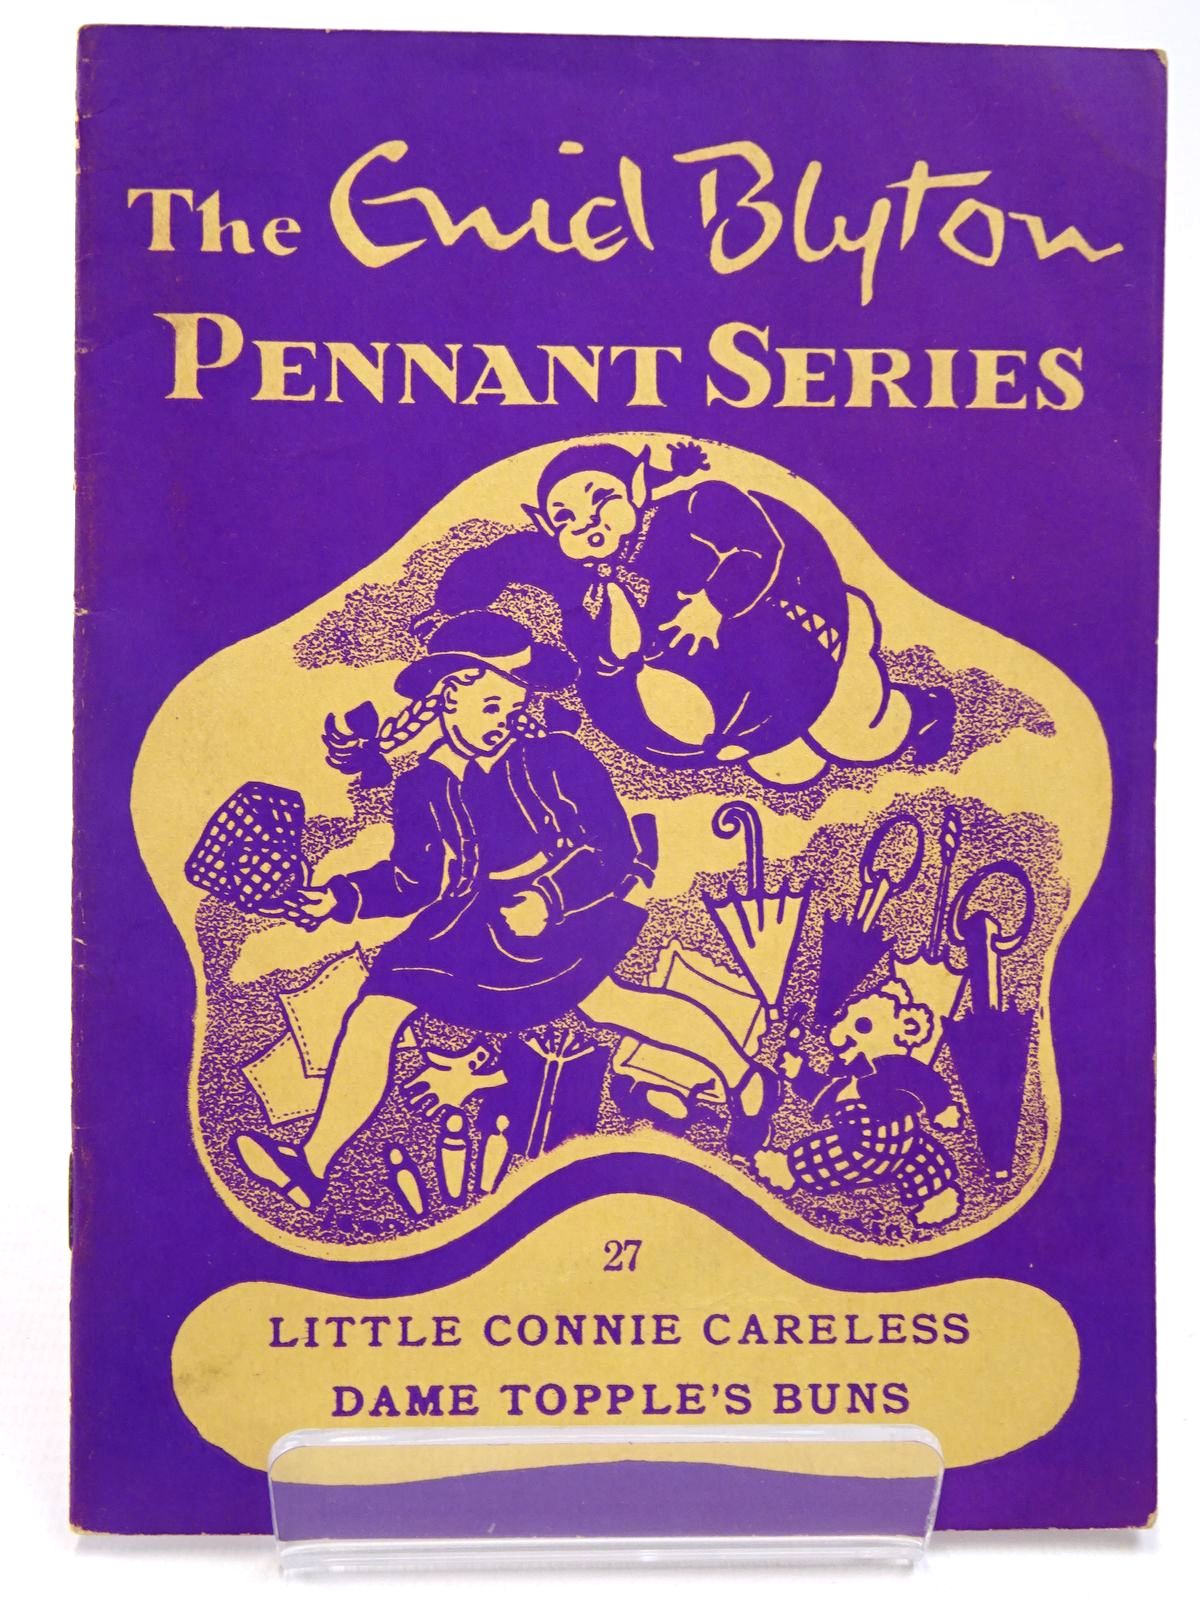 Photo of THE ENID BLYTON PENNANT SERIES No. 27 LITTLE CONNIE CARELESS / DAME TOPPLE'S BUNS written by Blyton, Enid illustrated by Soper, Eileen Main, Jean published by Macmillan &amp; Co. Ltd. (STOCK CODE: 2130513)  for sale by Stella & Rose's Books